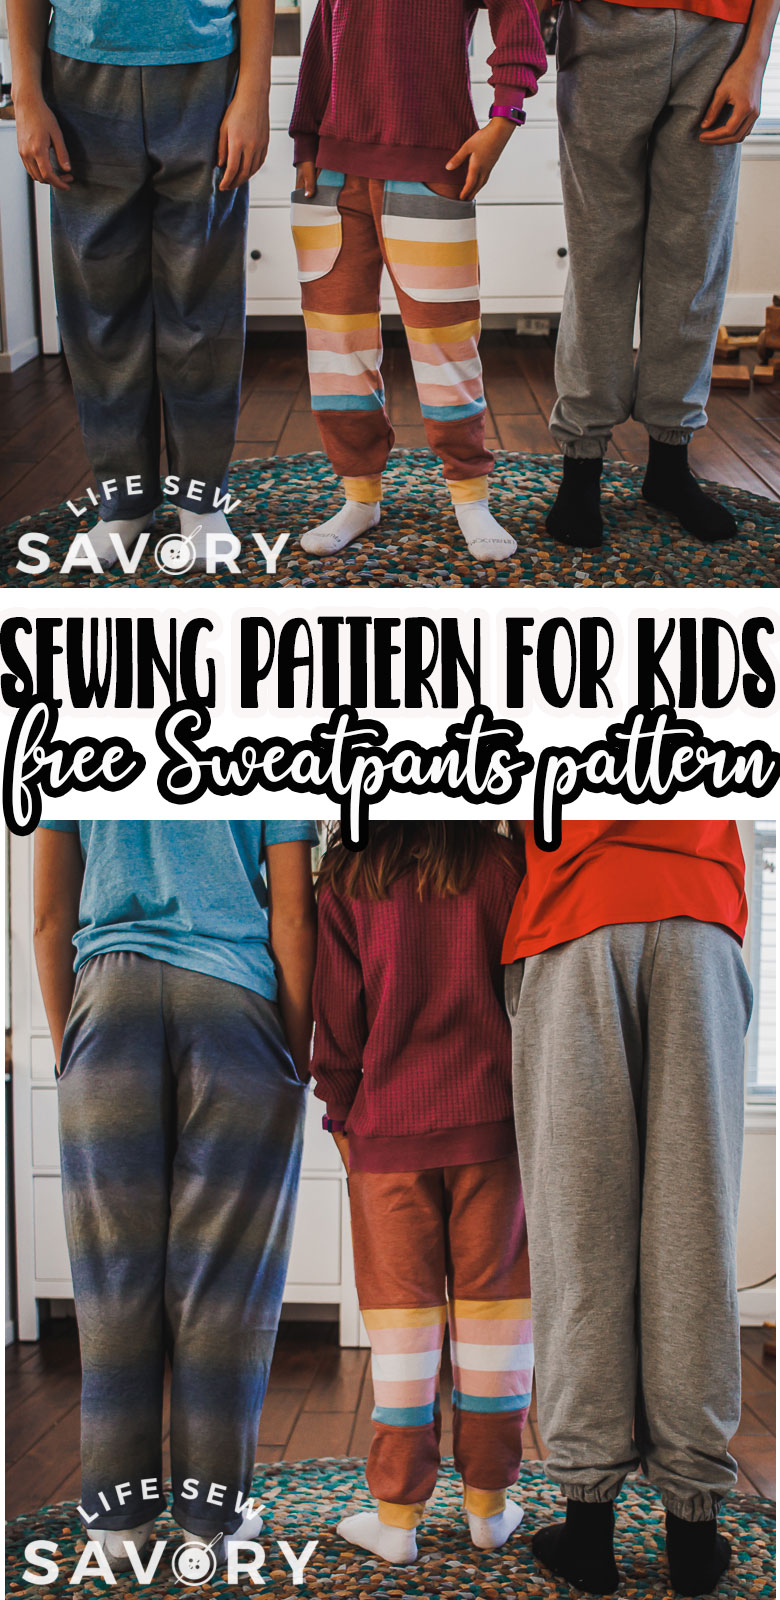 Sewing for Children is my favorite thing. Check out this free unisex sweatpants pattern that will give you a free pattern as well as a tutorial for how to sew sweatpants.